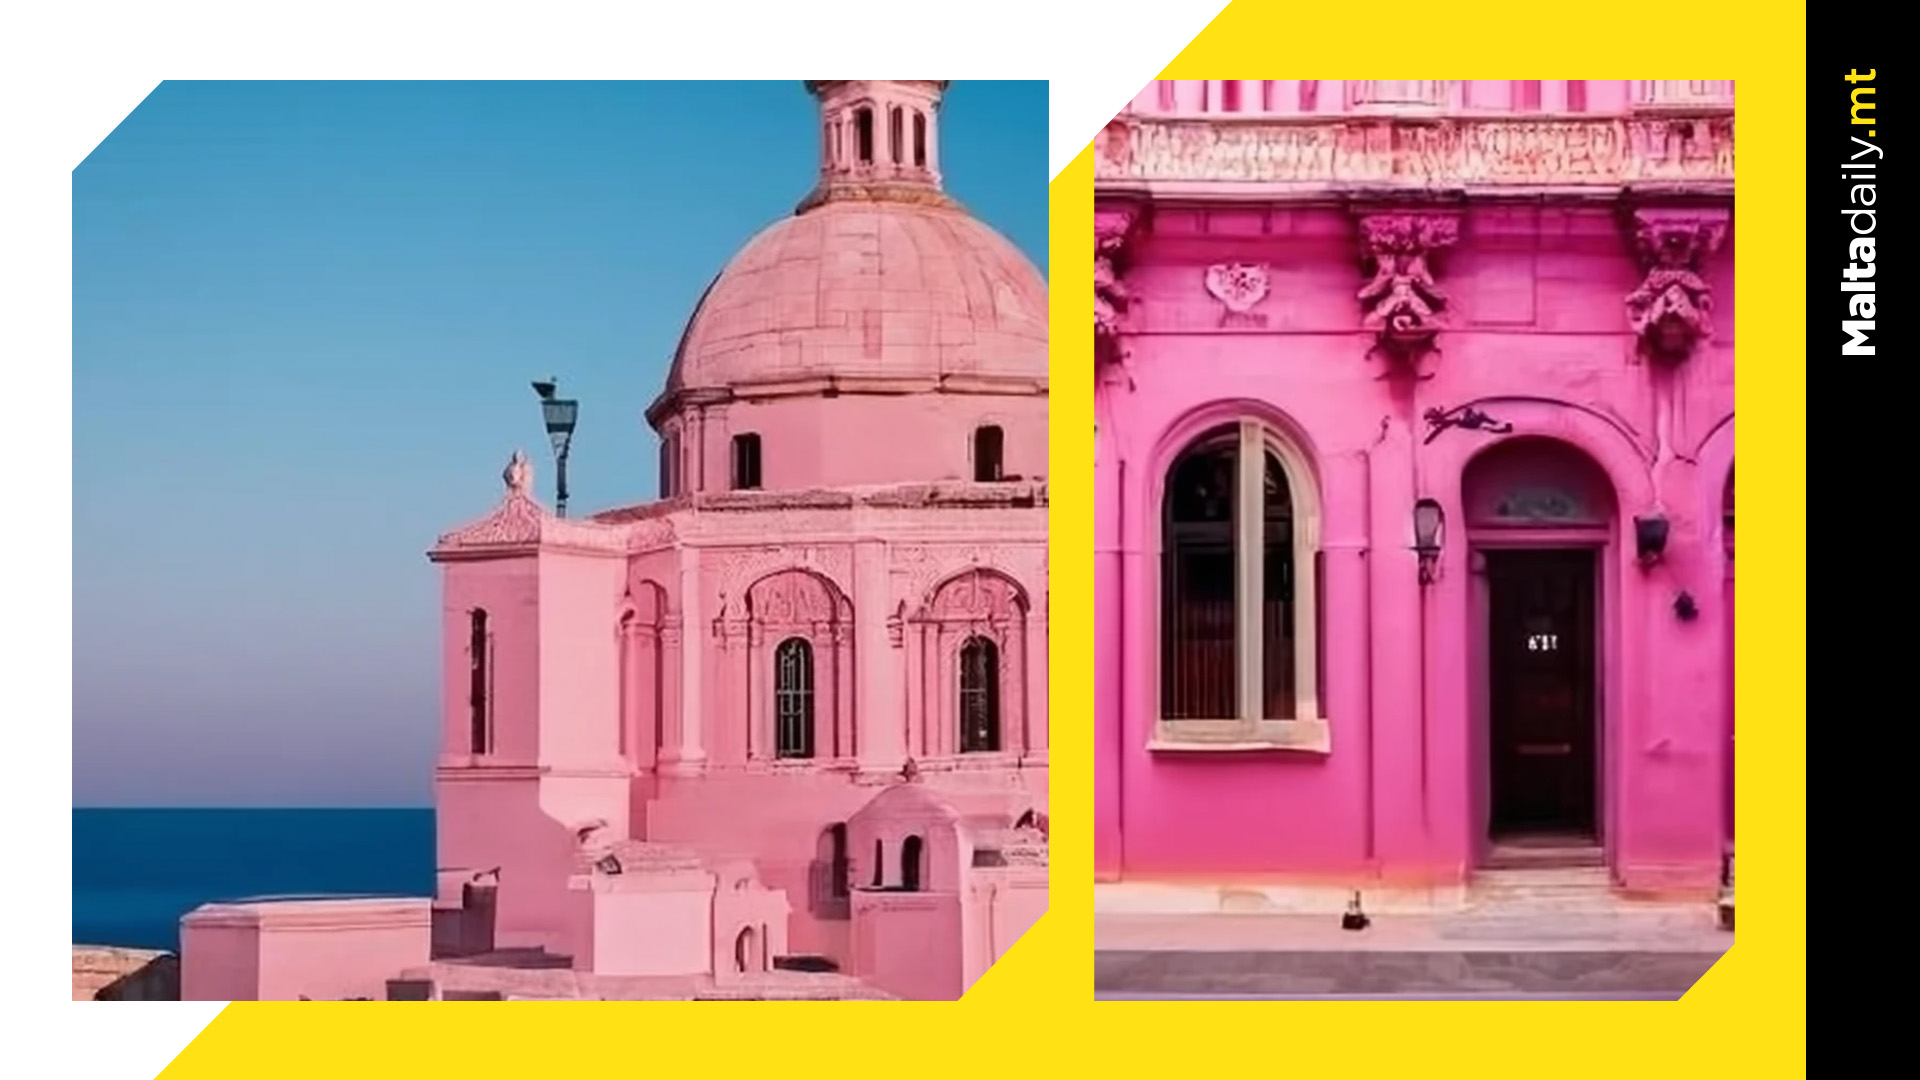 We Asked AI to "Barbie-fy" Malta... Here's What It Gave Us!